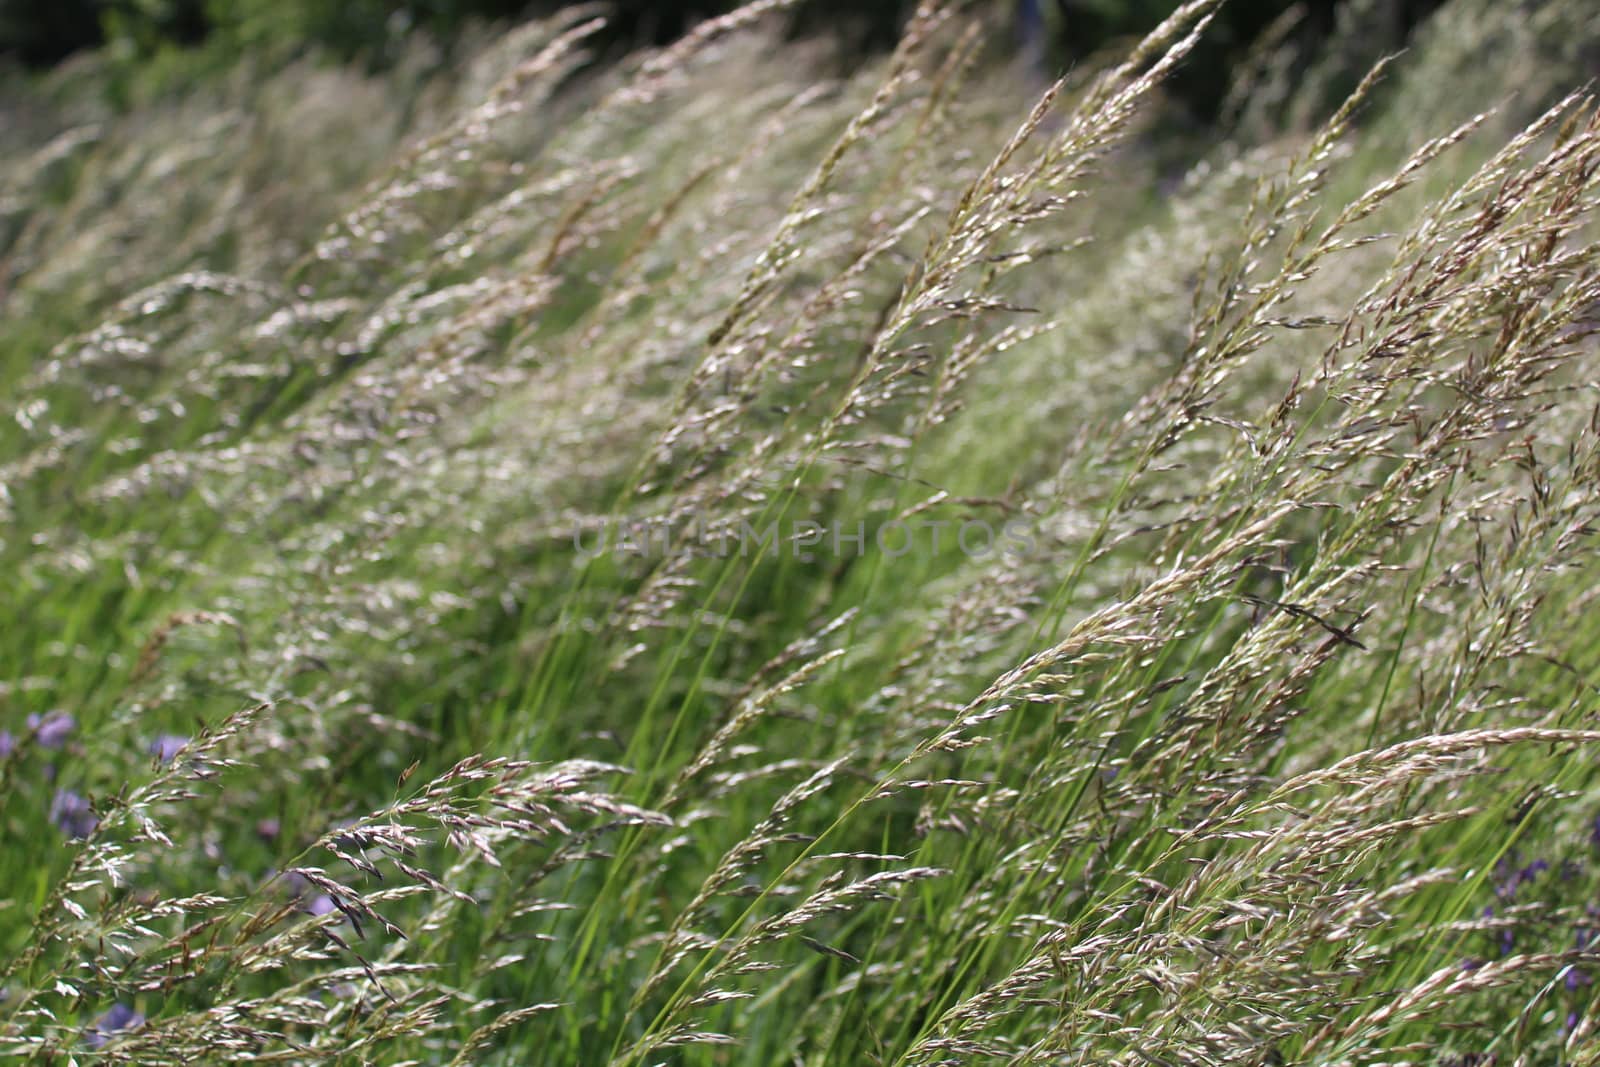 The picture shows grass in a meadow in the summer